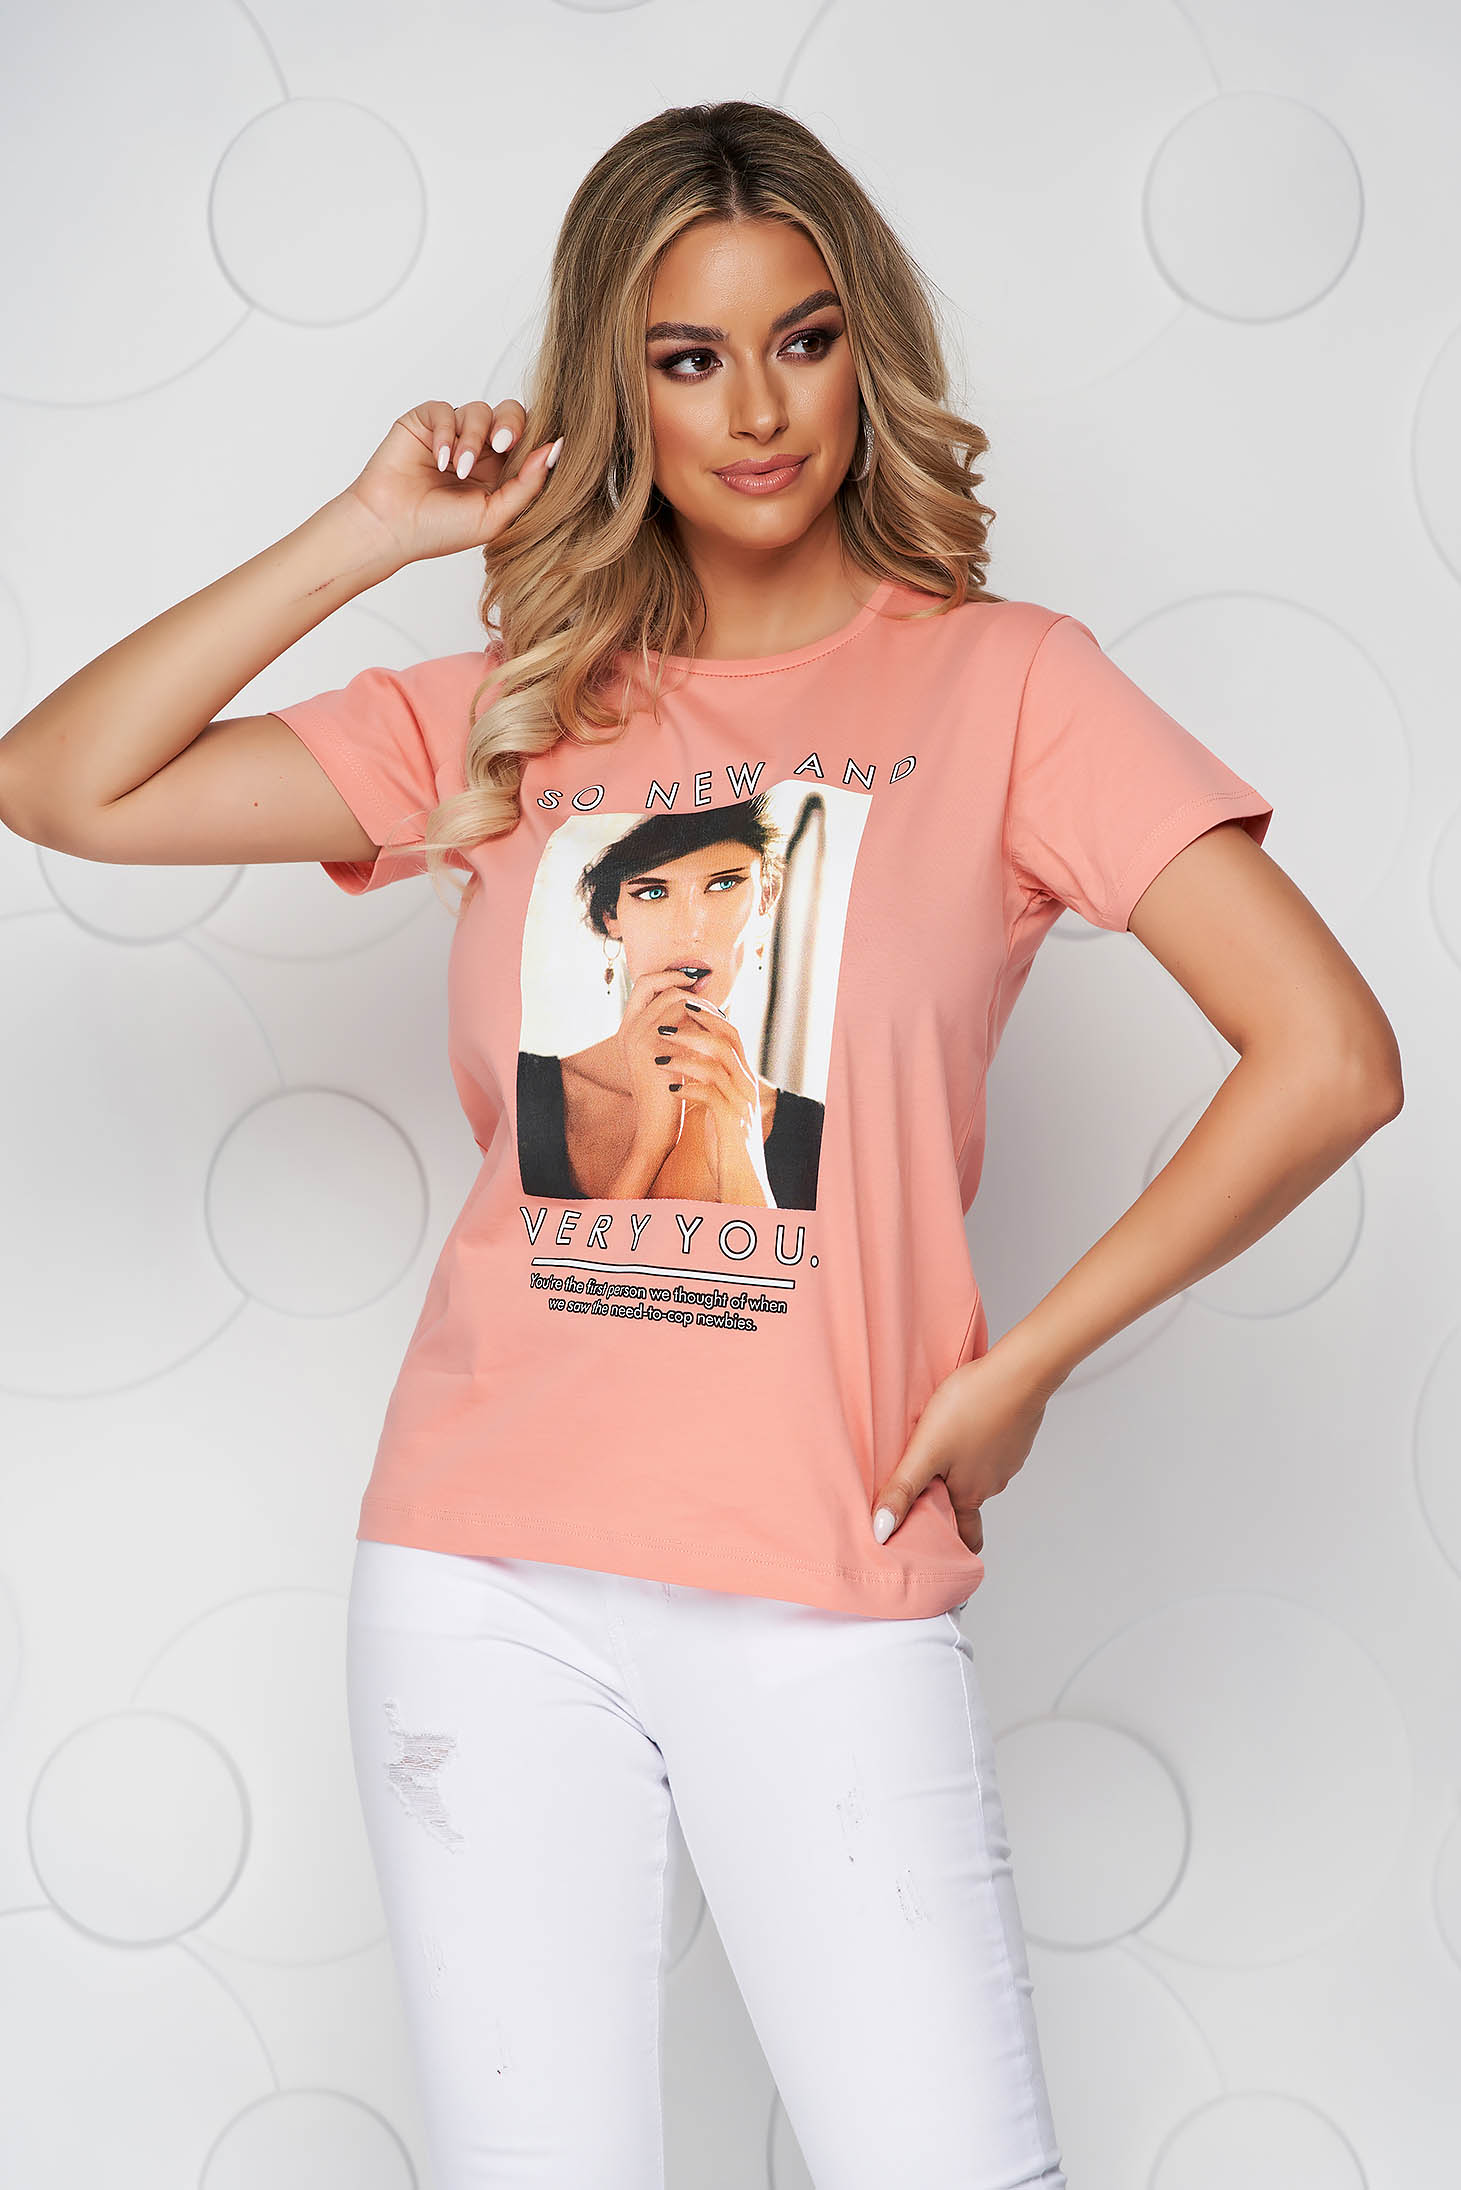 Pink cotton t-shirt with wide cut and rounded neckline - SunShine